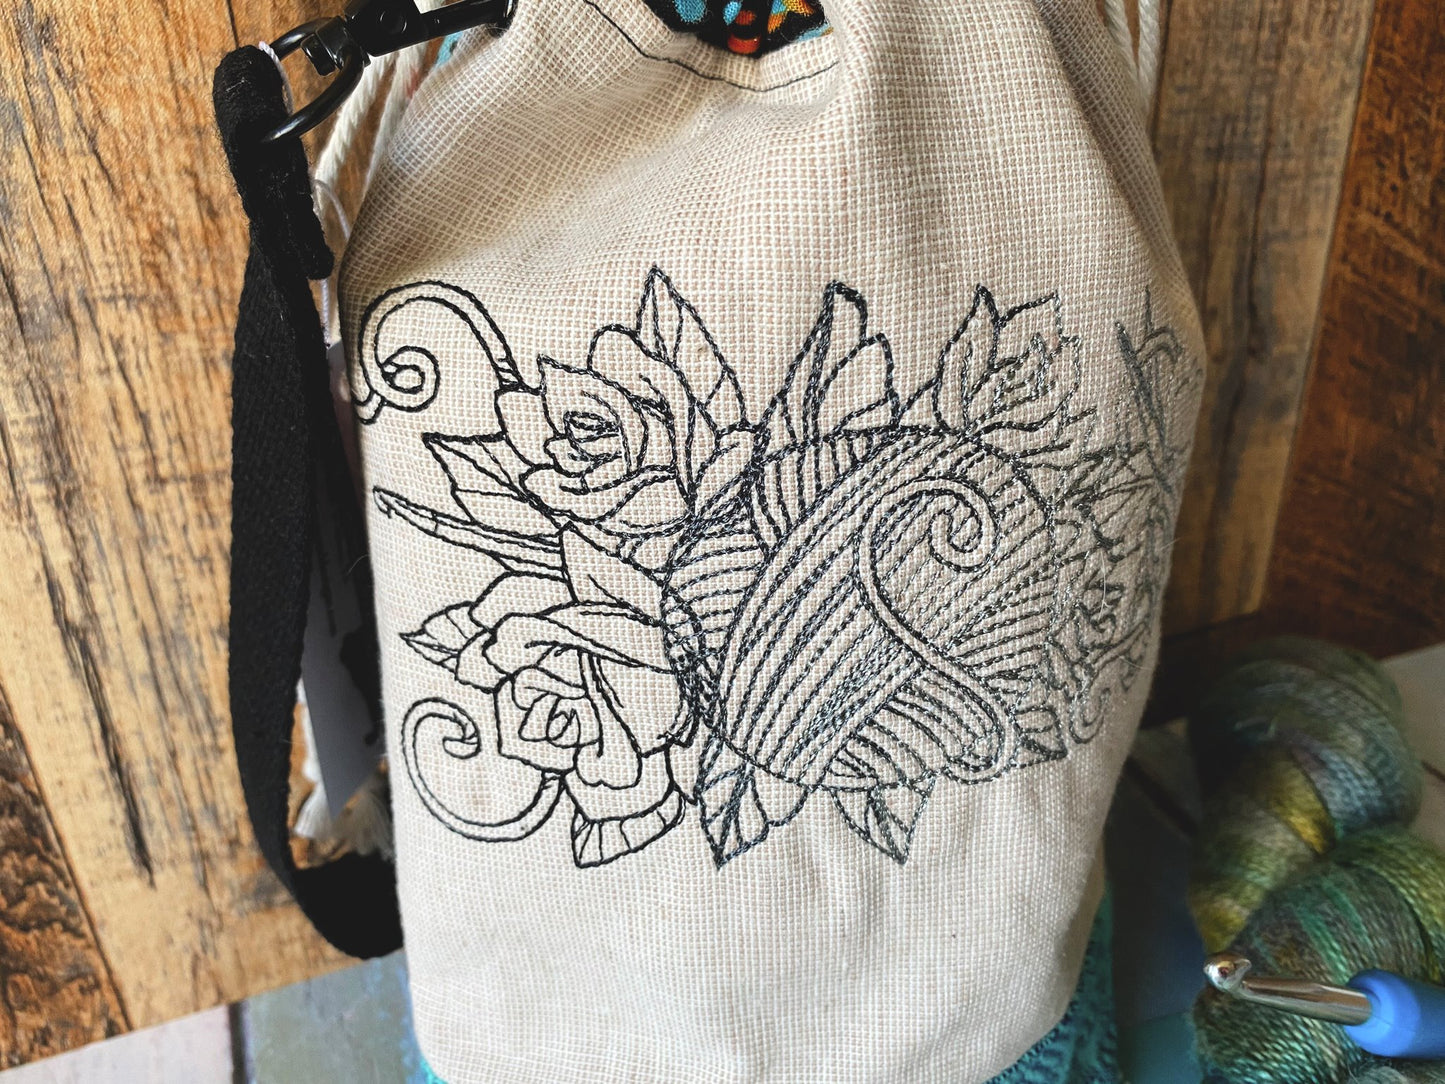 Crochet Forever and Sleeve Embroidery Drawstring Bag